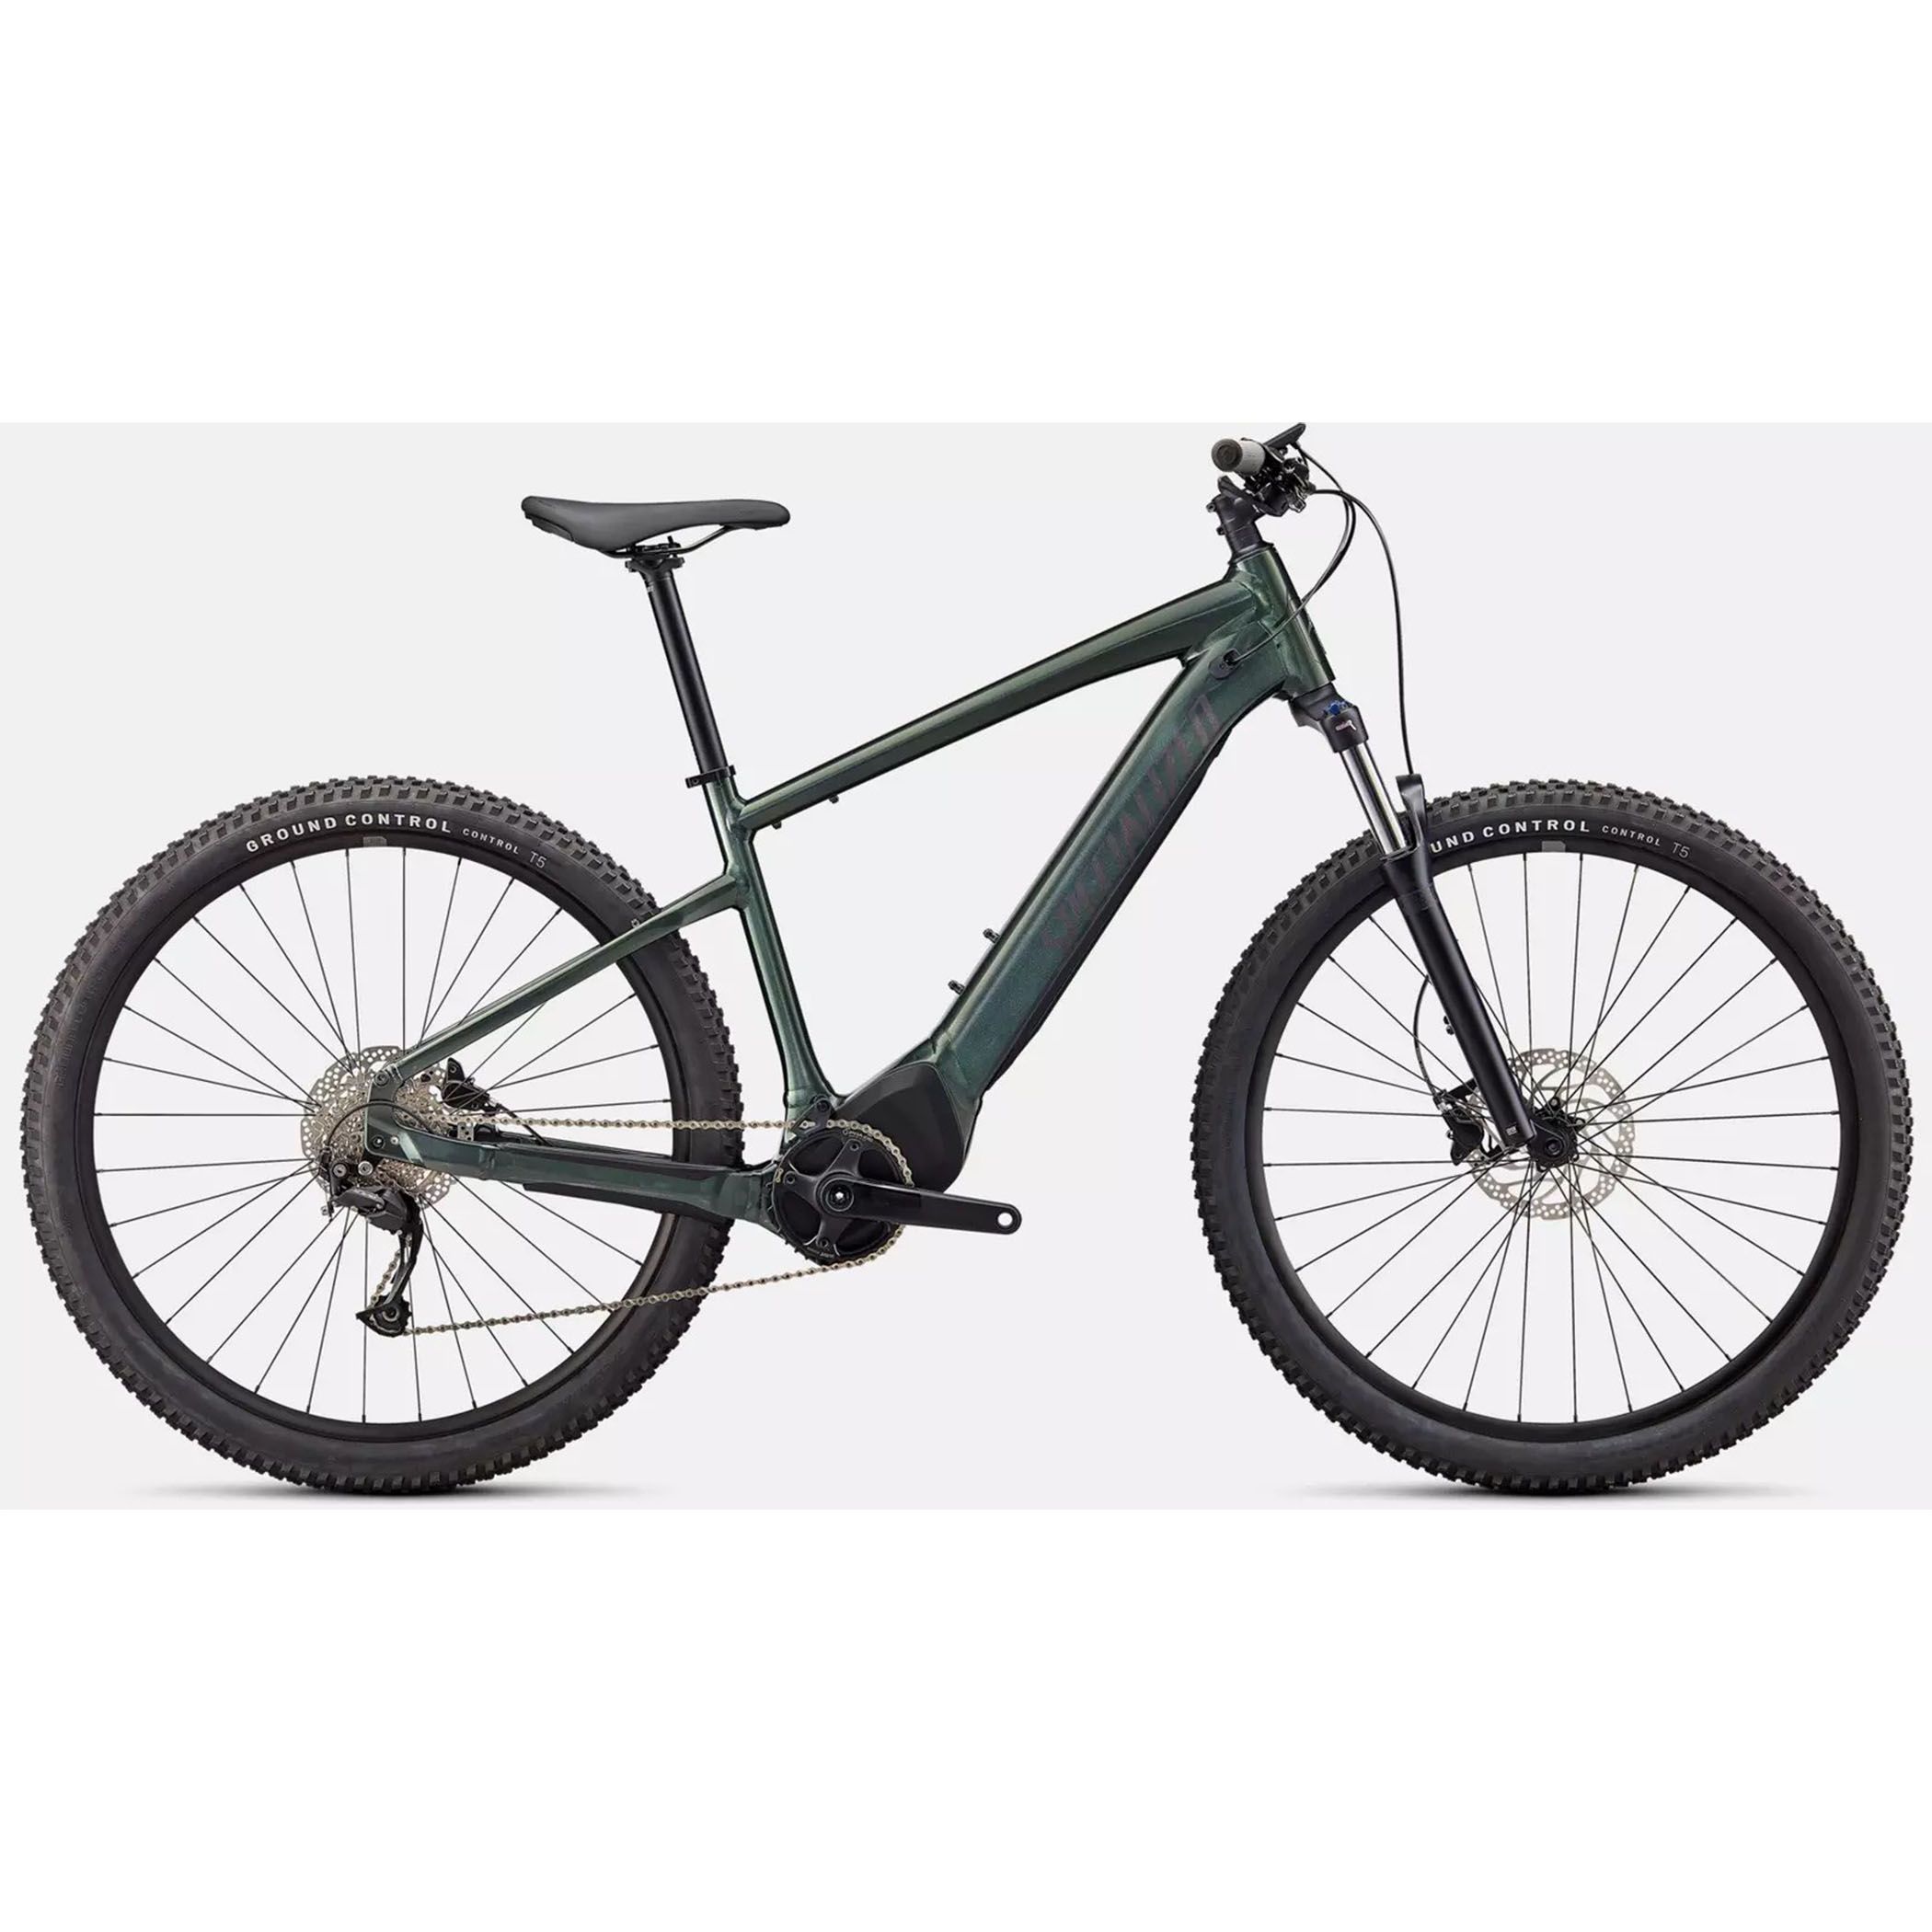 <p><strong>$3250.00</strong></p><p><a href="https://go.redirectingat.com?id=74968X1553576&url=https%3A%2F%2Fwww.specialized.com%2Fus%2Fen%2Fturbo-tero-30%2Fp%2F188110%3Fcolor%3D317404-188110%26ranMID%3D49187%26ranEAID%3DTnL5HPStwNw%26ranSiteID%3DTnL5HPStwNw-sWV50tjyc9cyczciGpvUoA&sref=https%3A%2F%2Fwww.roadandtrack.com%2Fgear%2Flifestyle%2Fg46464030%2Fbest-electric-bikes%2F">Shop Now</a></p><p>Specialized Turbo-series mountain bikes are among the <a href="https://go.skimresources.com/?id=74968X1576257&isjs=1&jv=15.4.2-stackpath&sref=https%3A%2F%2Fwww.bicycling.com%2Fbikes-gear%2Fa22132137%2Fbest-electric-bikes%2F&url=https%3A%2F%2Fwww.specialized.com%2Fus%2Fen%2Fturbo-tero-30%2Fp%2F188110%3Fcolor%3D317404-188110&xs=1&xtz=300&xuuid=11de4441afba09ea39ef78b56a17ca06&xjsf=other_click__contextmenu+%5B2%5D">favorites</a> of the staff at <em>Bicycling. </em>If you're a mountain biker and want to dip your toes into the world of e-bicycles, the Turbo Tero 3.0 is a great place to start. </p><p>With 2.4-inch-wide tires, hydraulic disc brakes, and a 110-mm travel suspension fork, this bike is capable but takes some getting used to on the trail, according to one test rider. The components are durable enough for off-road conditions, and their standard sizing facilitates easy upgrades and replacements, enhancing the bike's appeal for entry-level trail riders.</p>